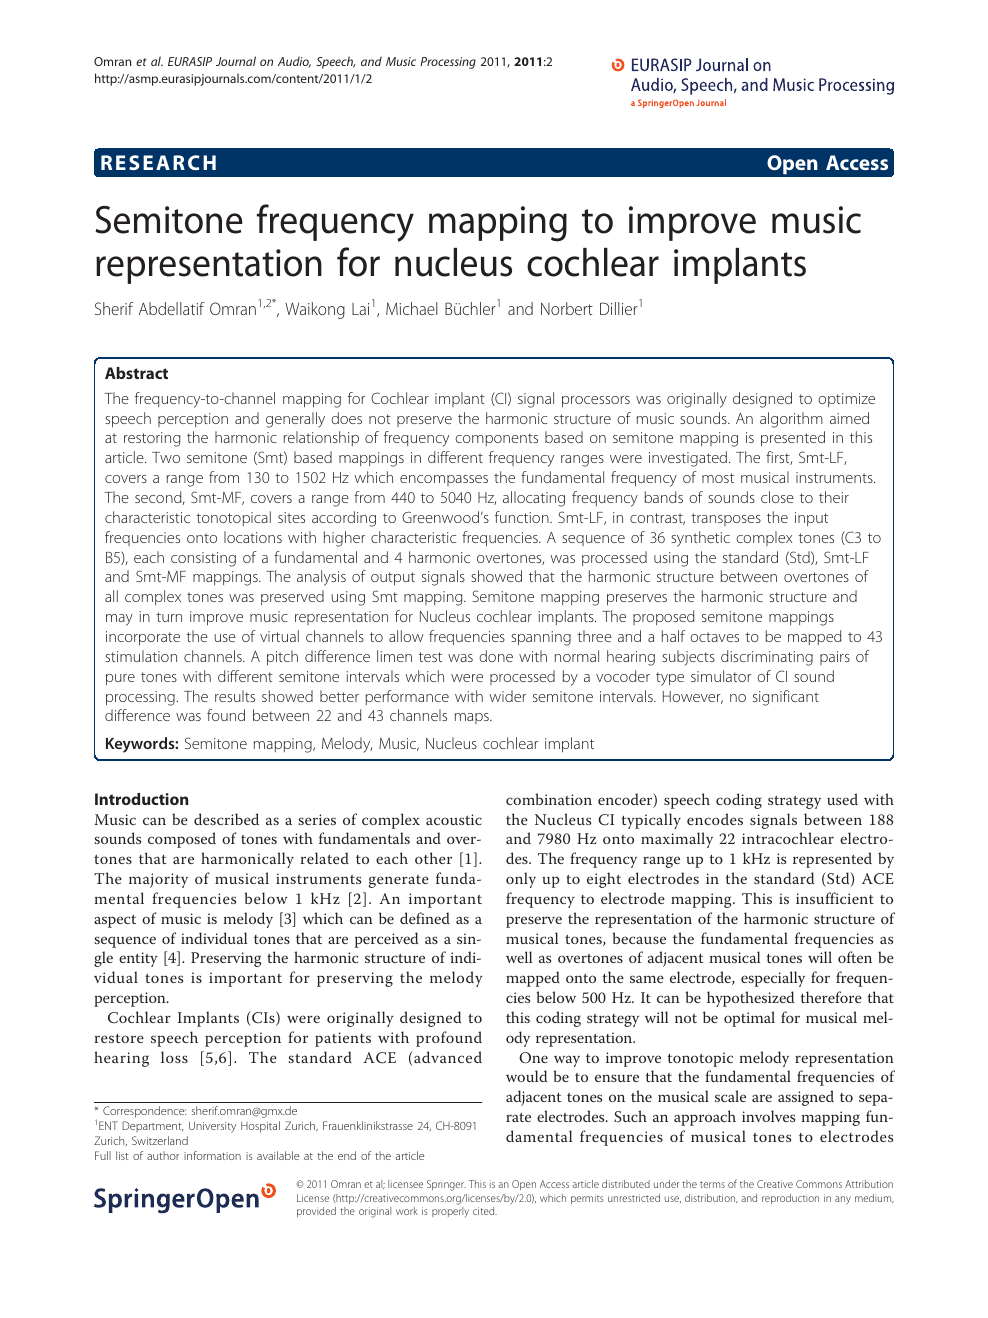 Semitone Frequency Mapping To Improve Music Representation For Nucleus Cochlear Implants Topic Of Research Paper In Medical Engineering Download Scholarly Article Pdf And Read For Free On Cyberleninka Open Science Hub